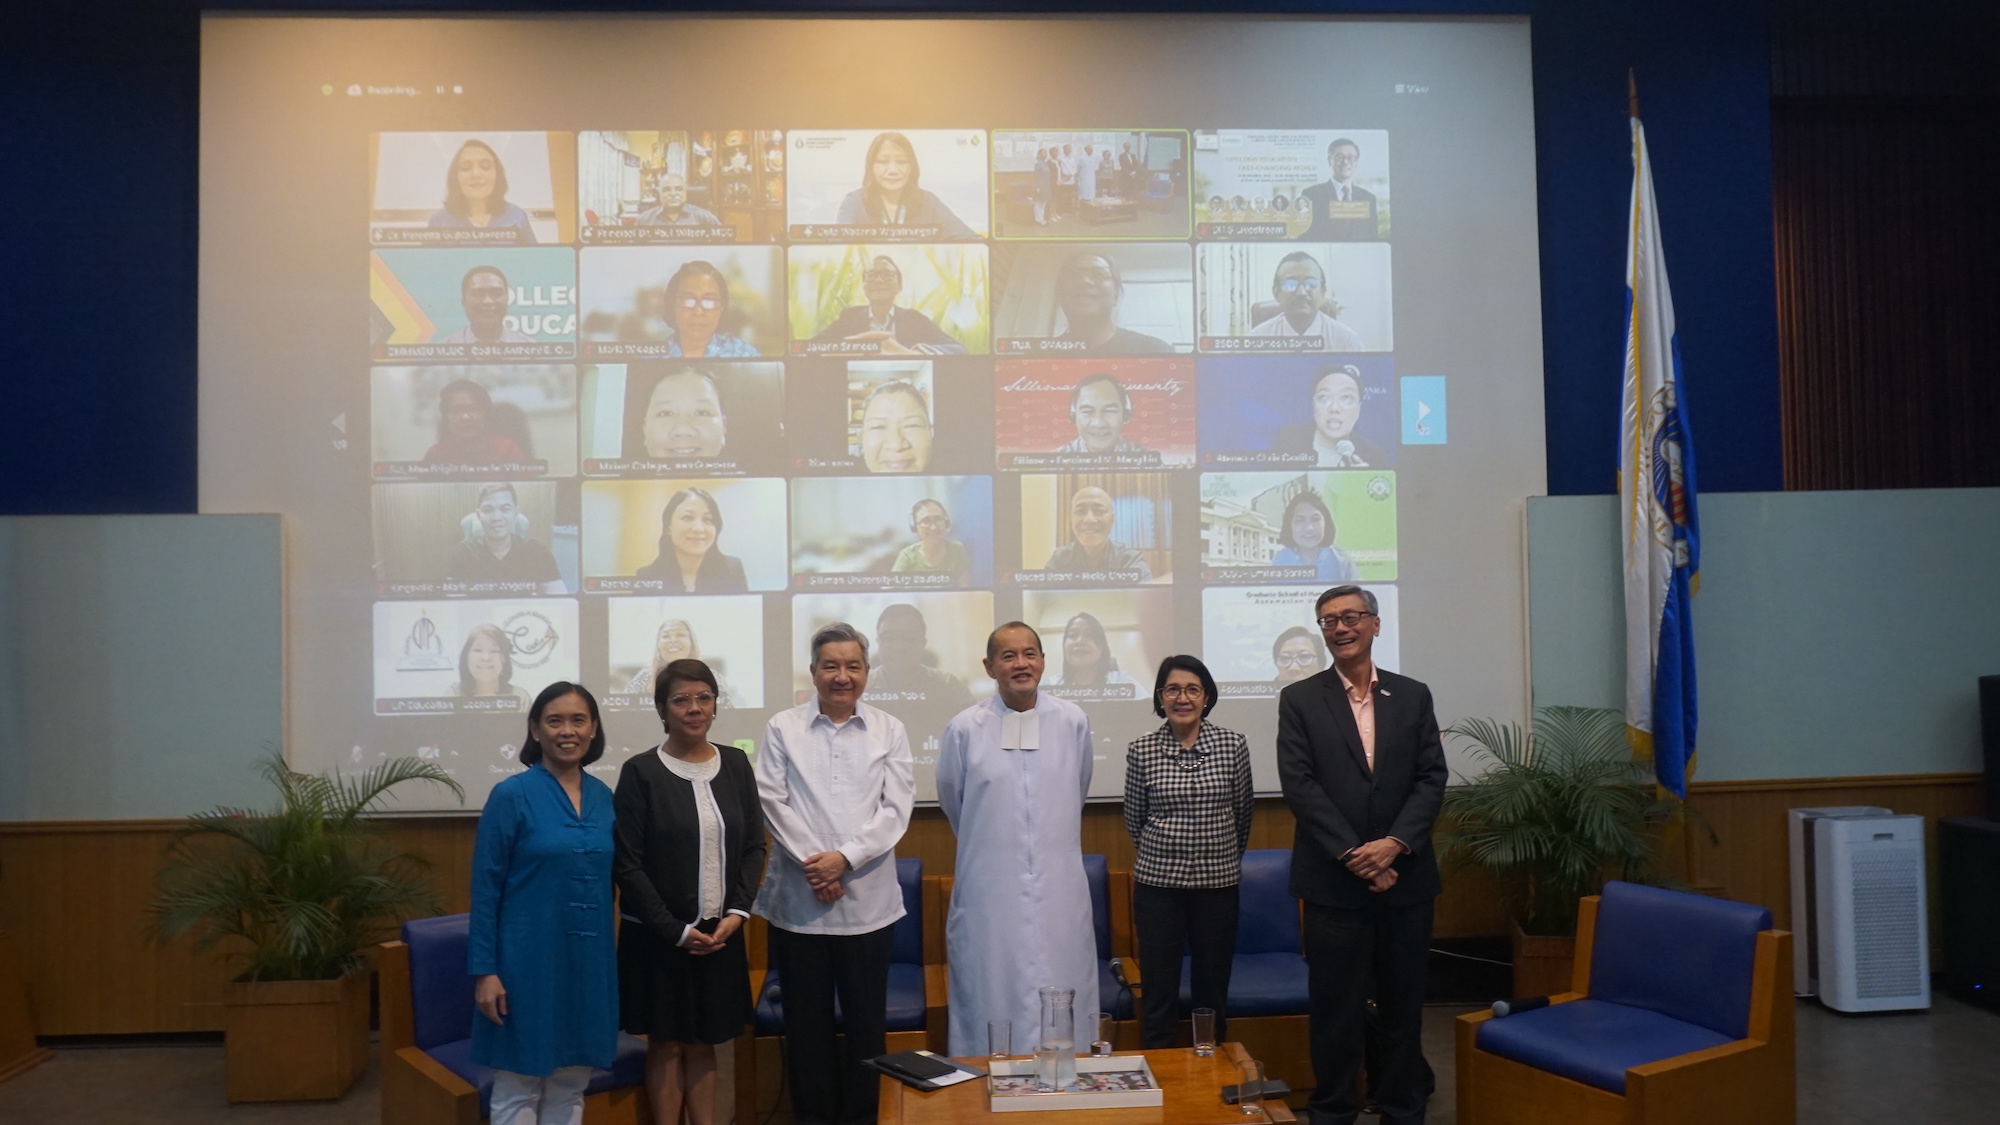 Dr Ma Assunta Cuyegkeng, Dr Isabel P Martin, Fr Roberto C Yap SJ, Br Bernard S Oca FSC, Dr Cynthia Rose Bautista, Prof Tan Eng Chye with some of the online participants of the discussion. 